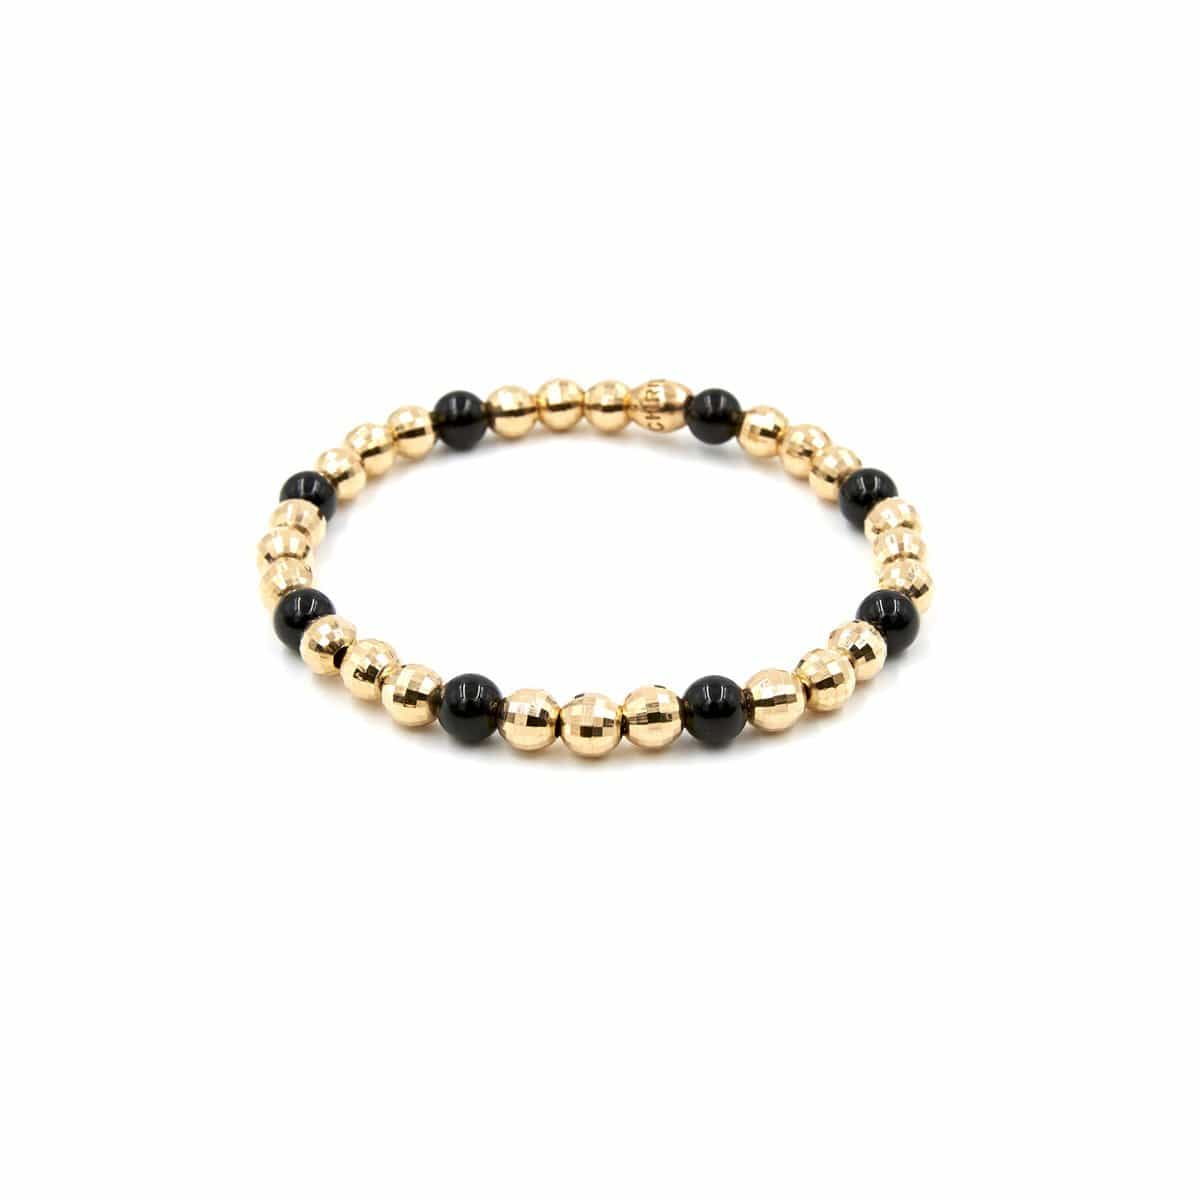 GOLD AND BEAD BRACELET - Chris Aire Fine Jewelry & Timepieces